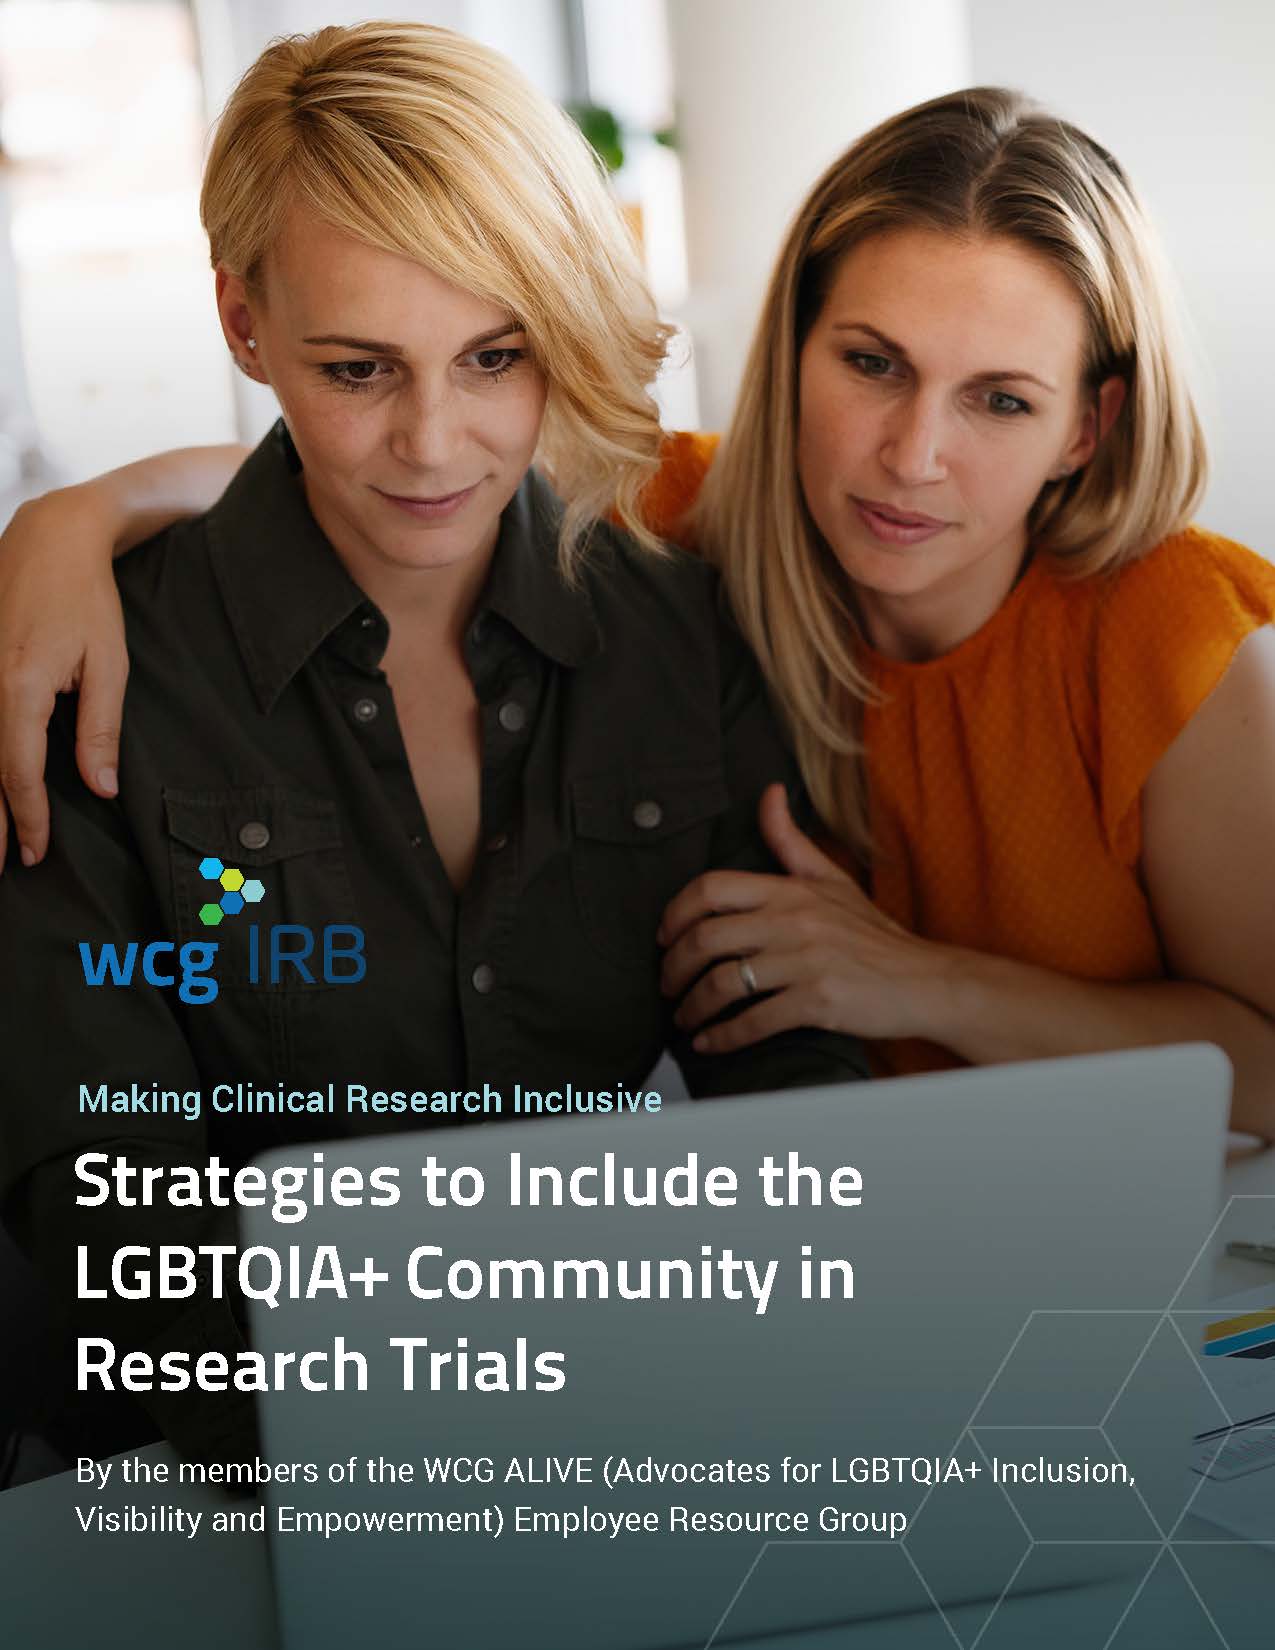 Making Clinical Research Inclusive: Strategies to Include the LGBTQIA+ Community in Research Trials